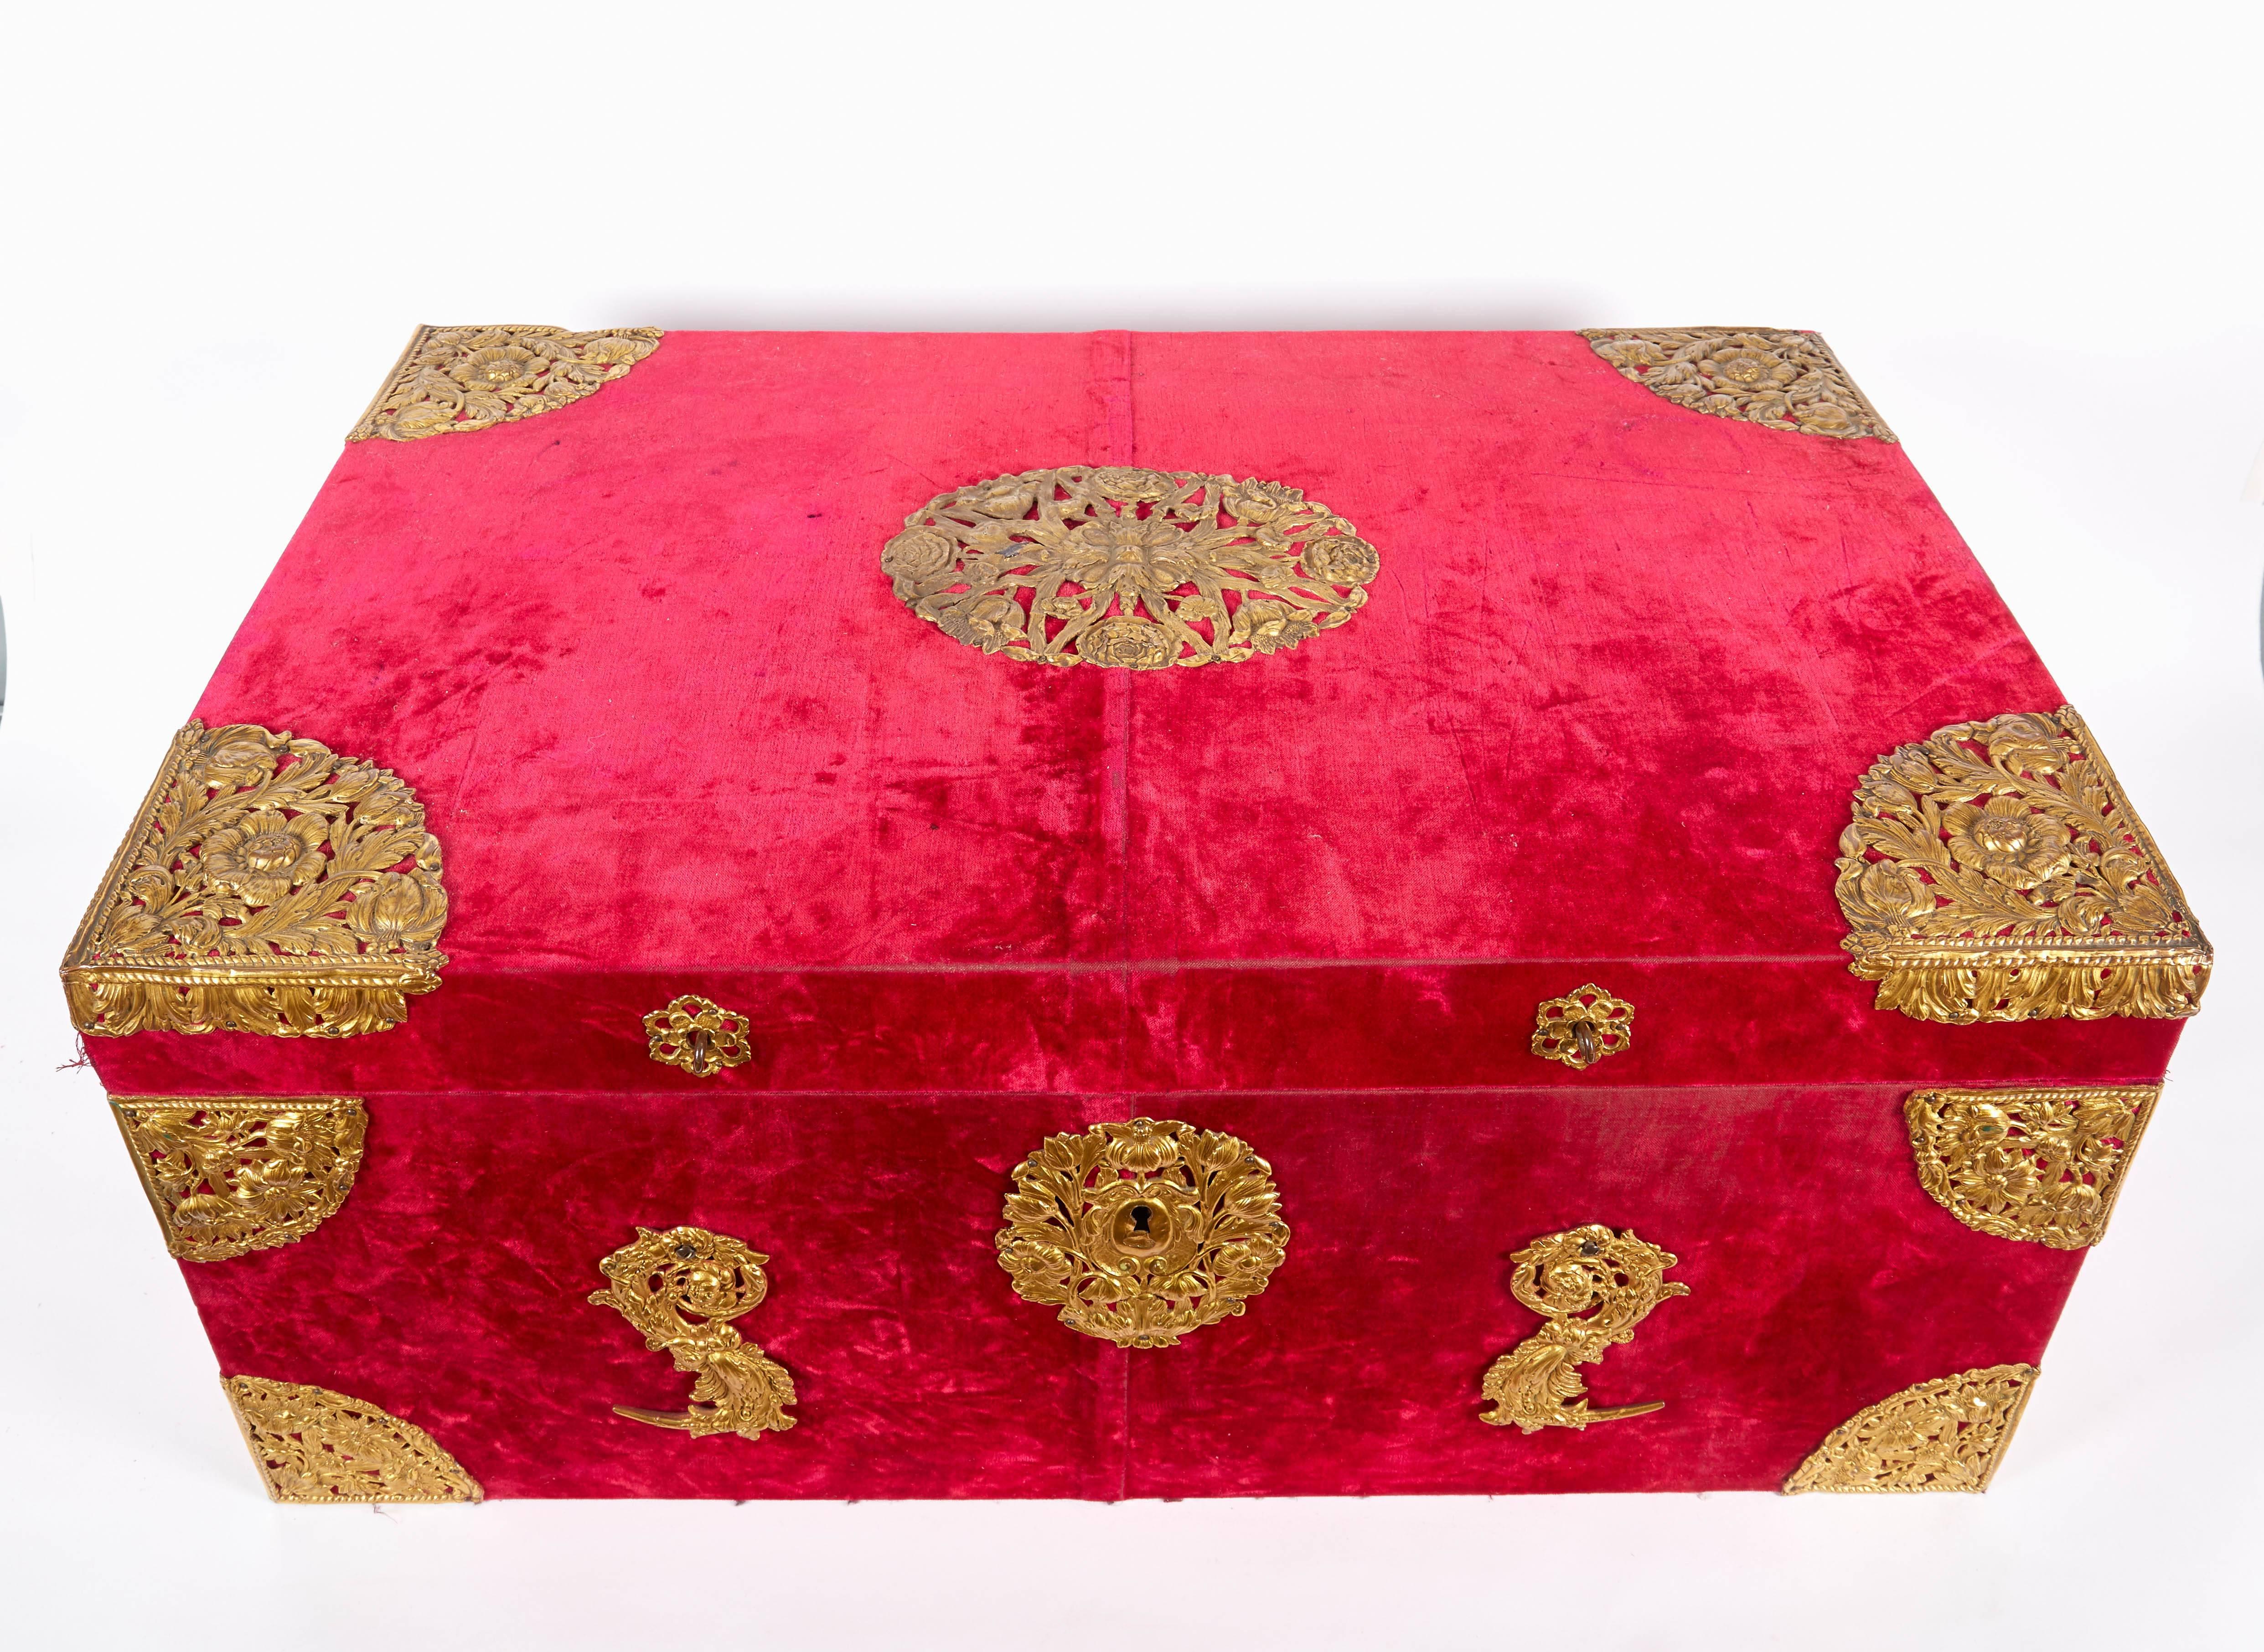 20th Century Large Gilt-Bronze Mounted Red Velvet Box / Trunk by E.F. Caldwell & Co.